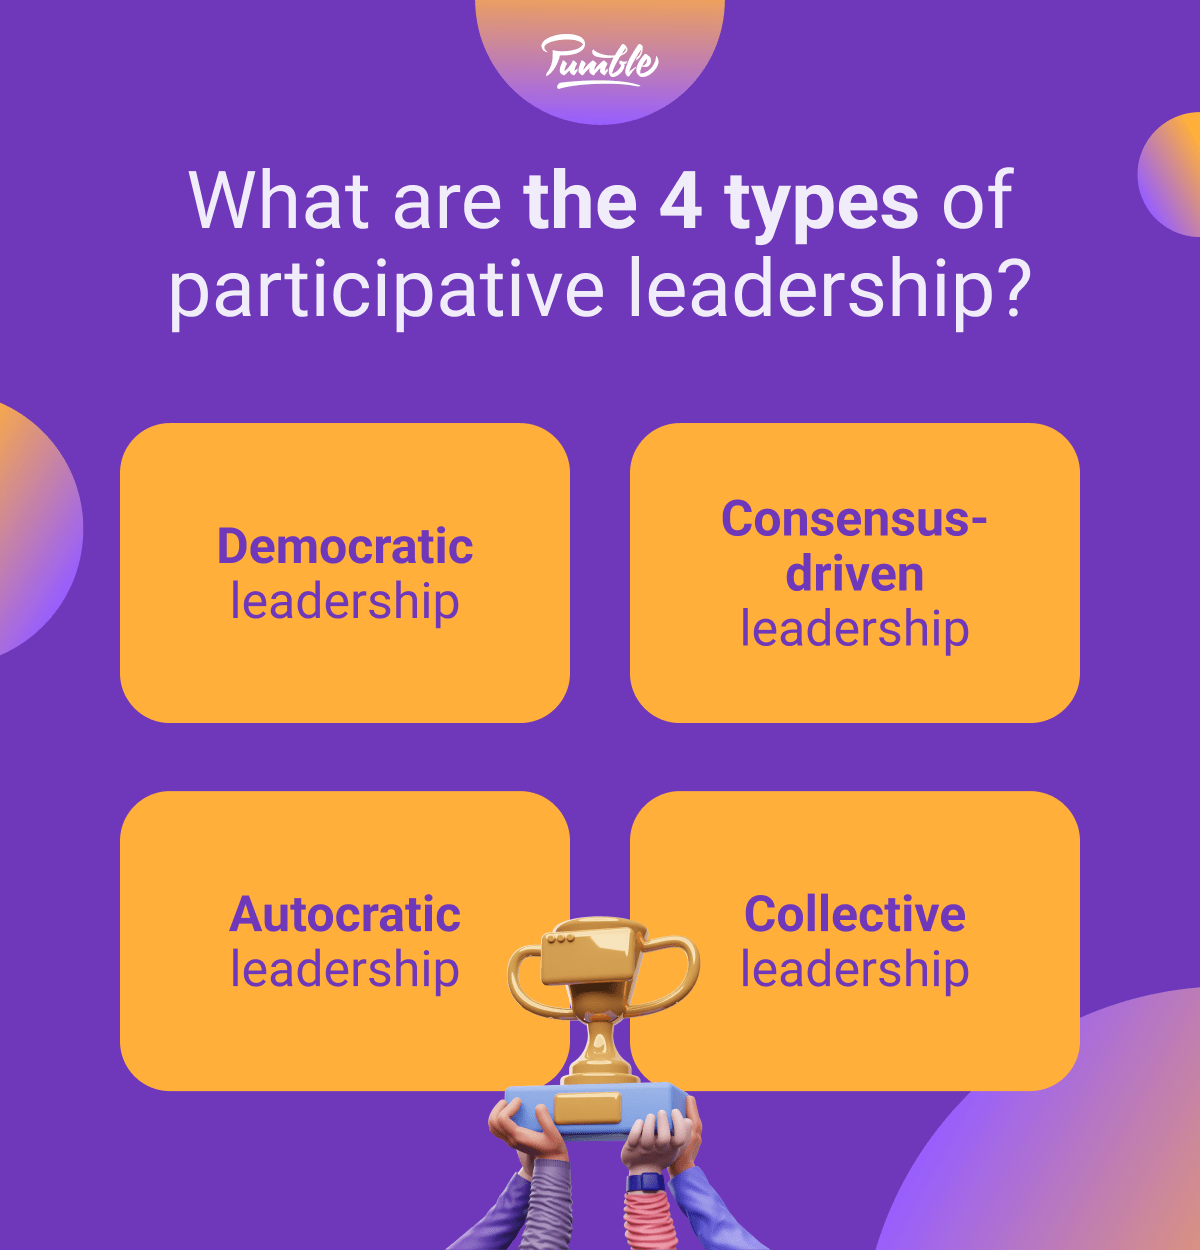 What are the 4 types of participative leadership